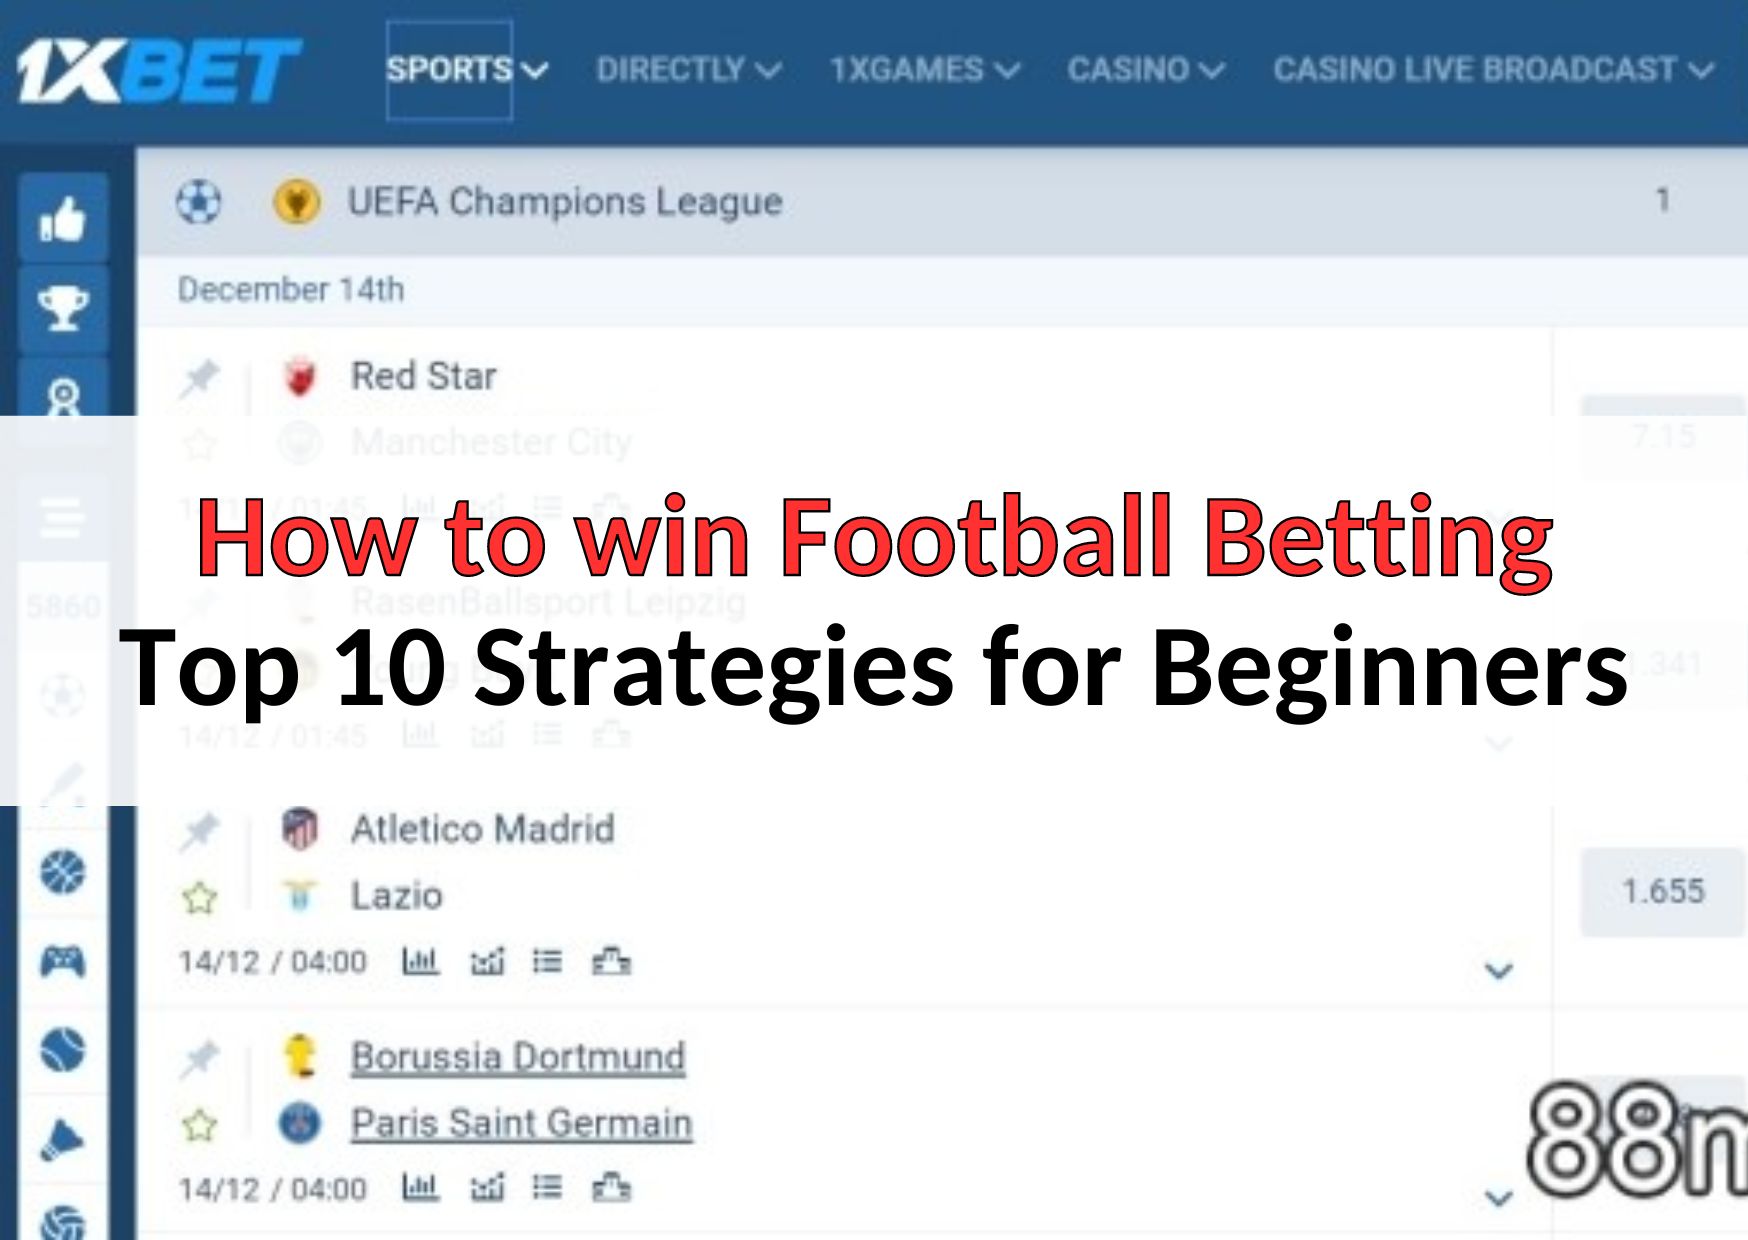 How to win Football Betting